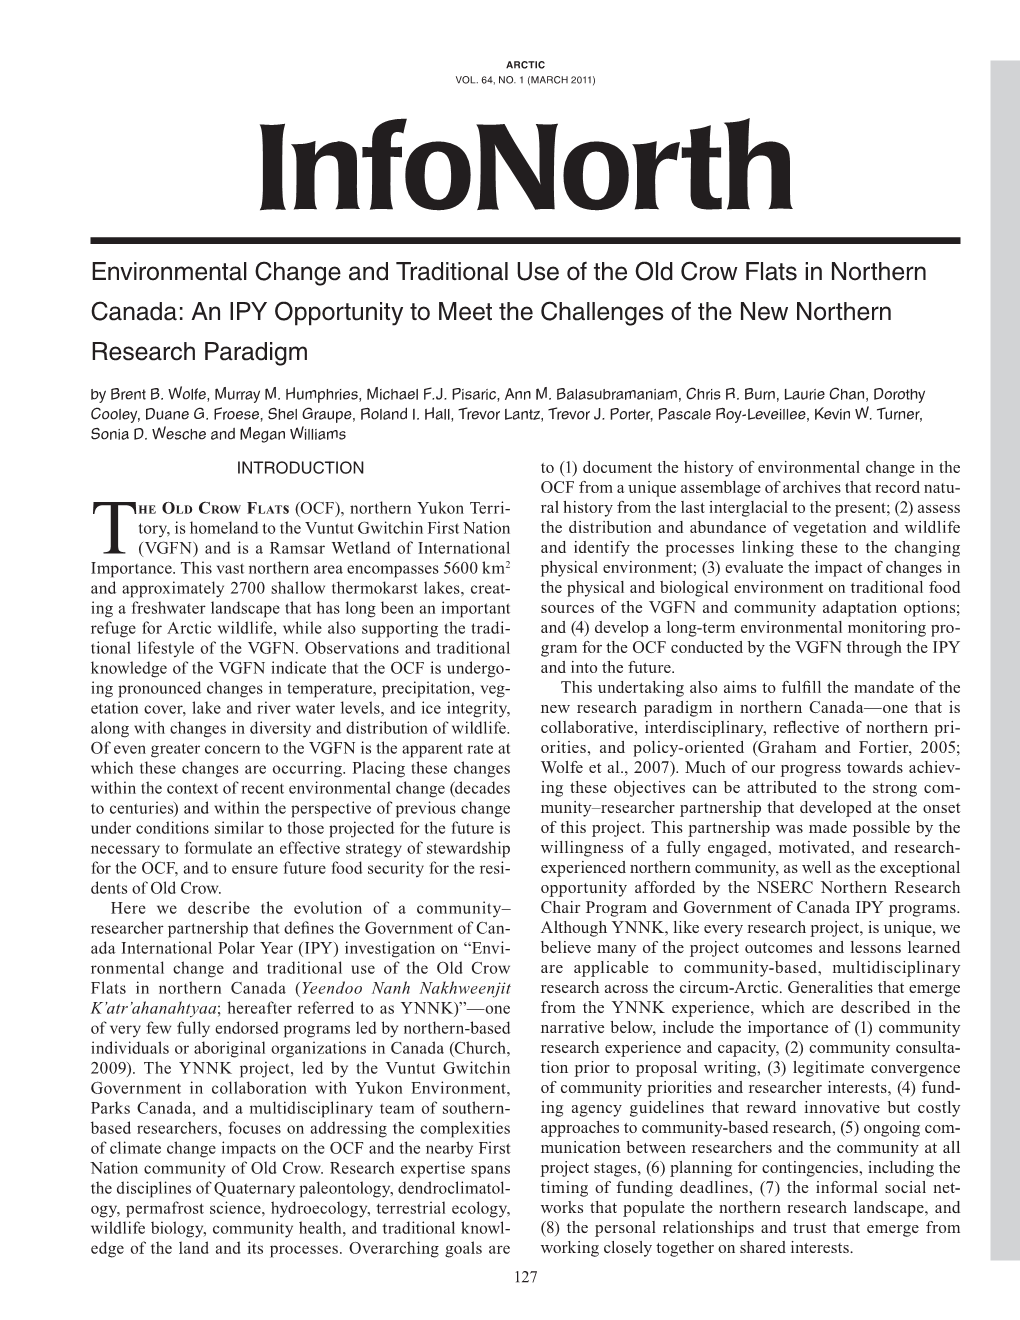 Environmental Change and Traditional Use of the Old Crow Flats in Northern Canada: an IPY Opportunity to Meet the Challenges of the New Northern Research Paradigm